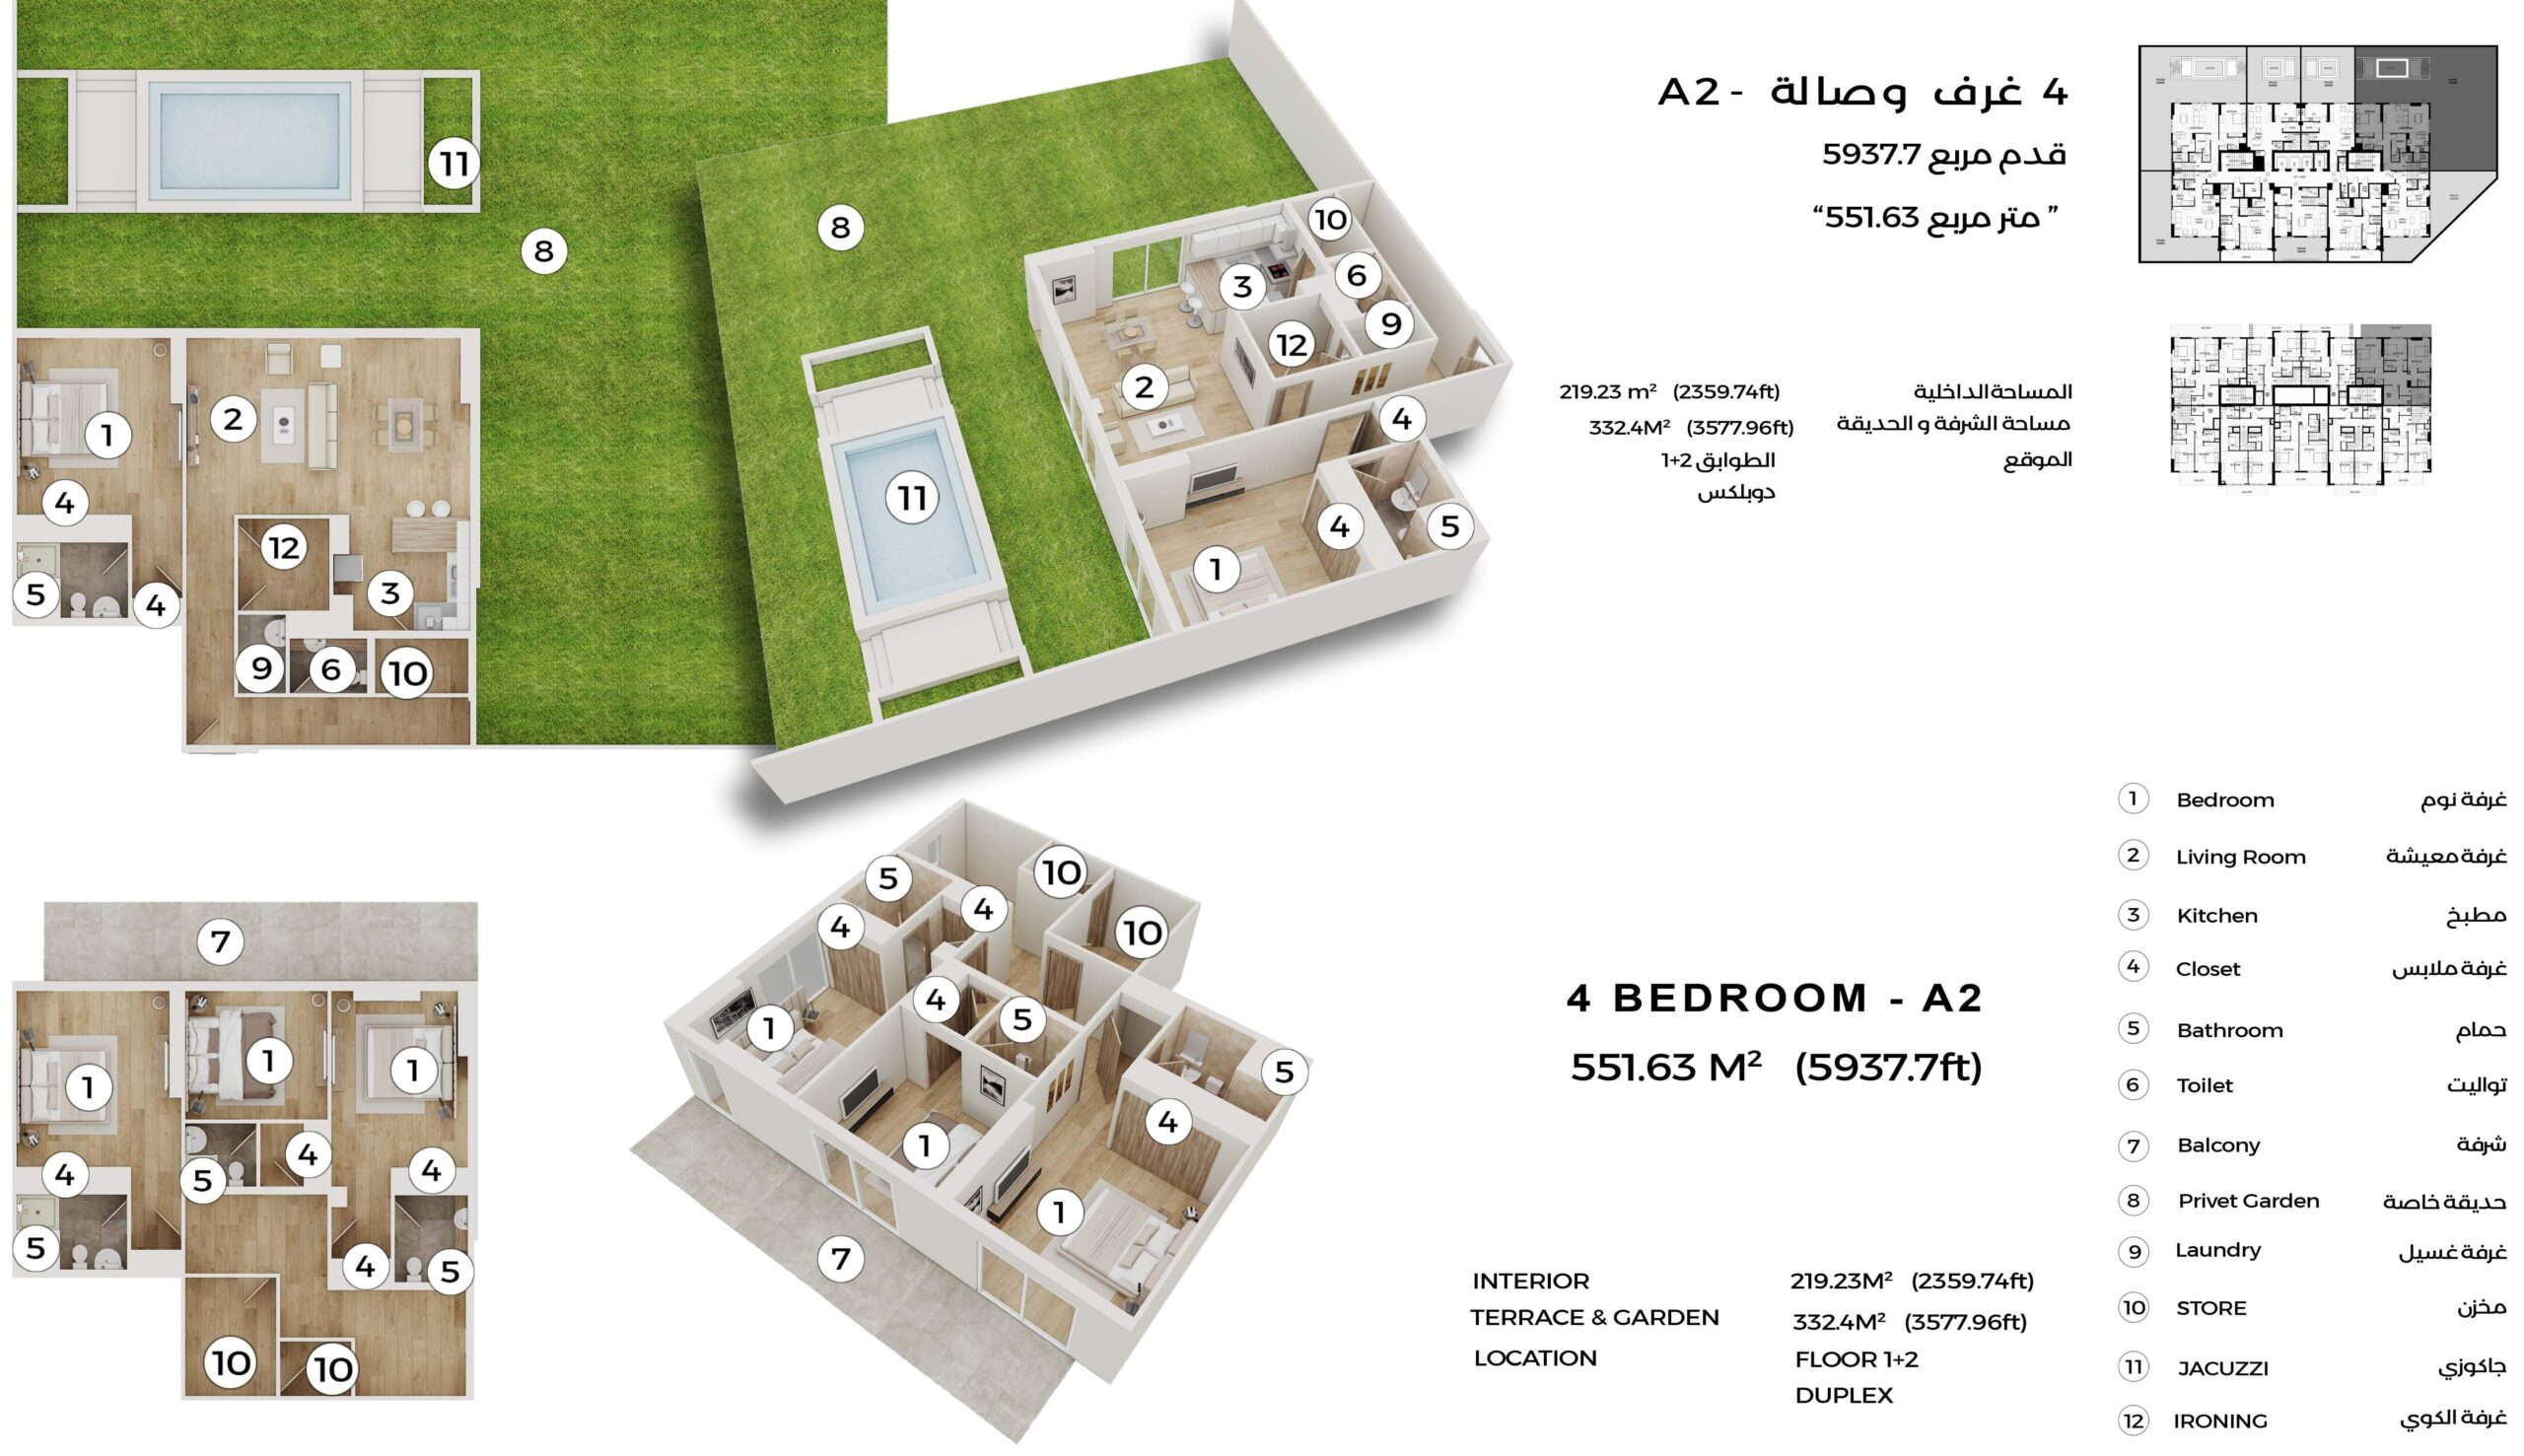 4 Bed rooms_A2-min